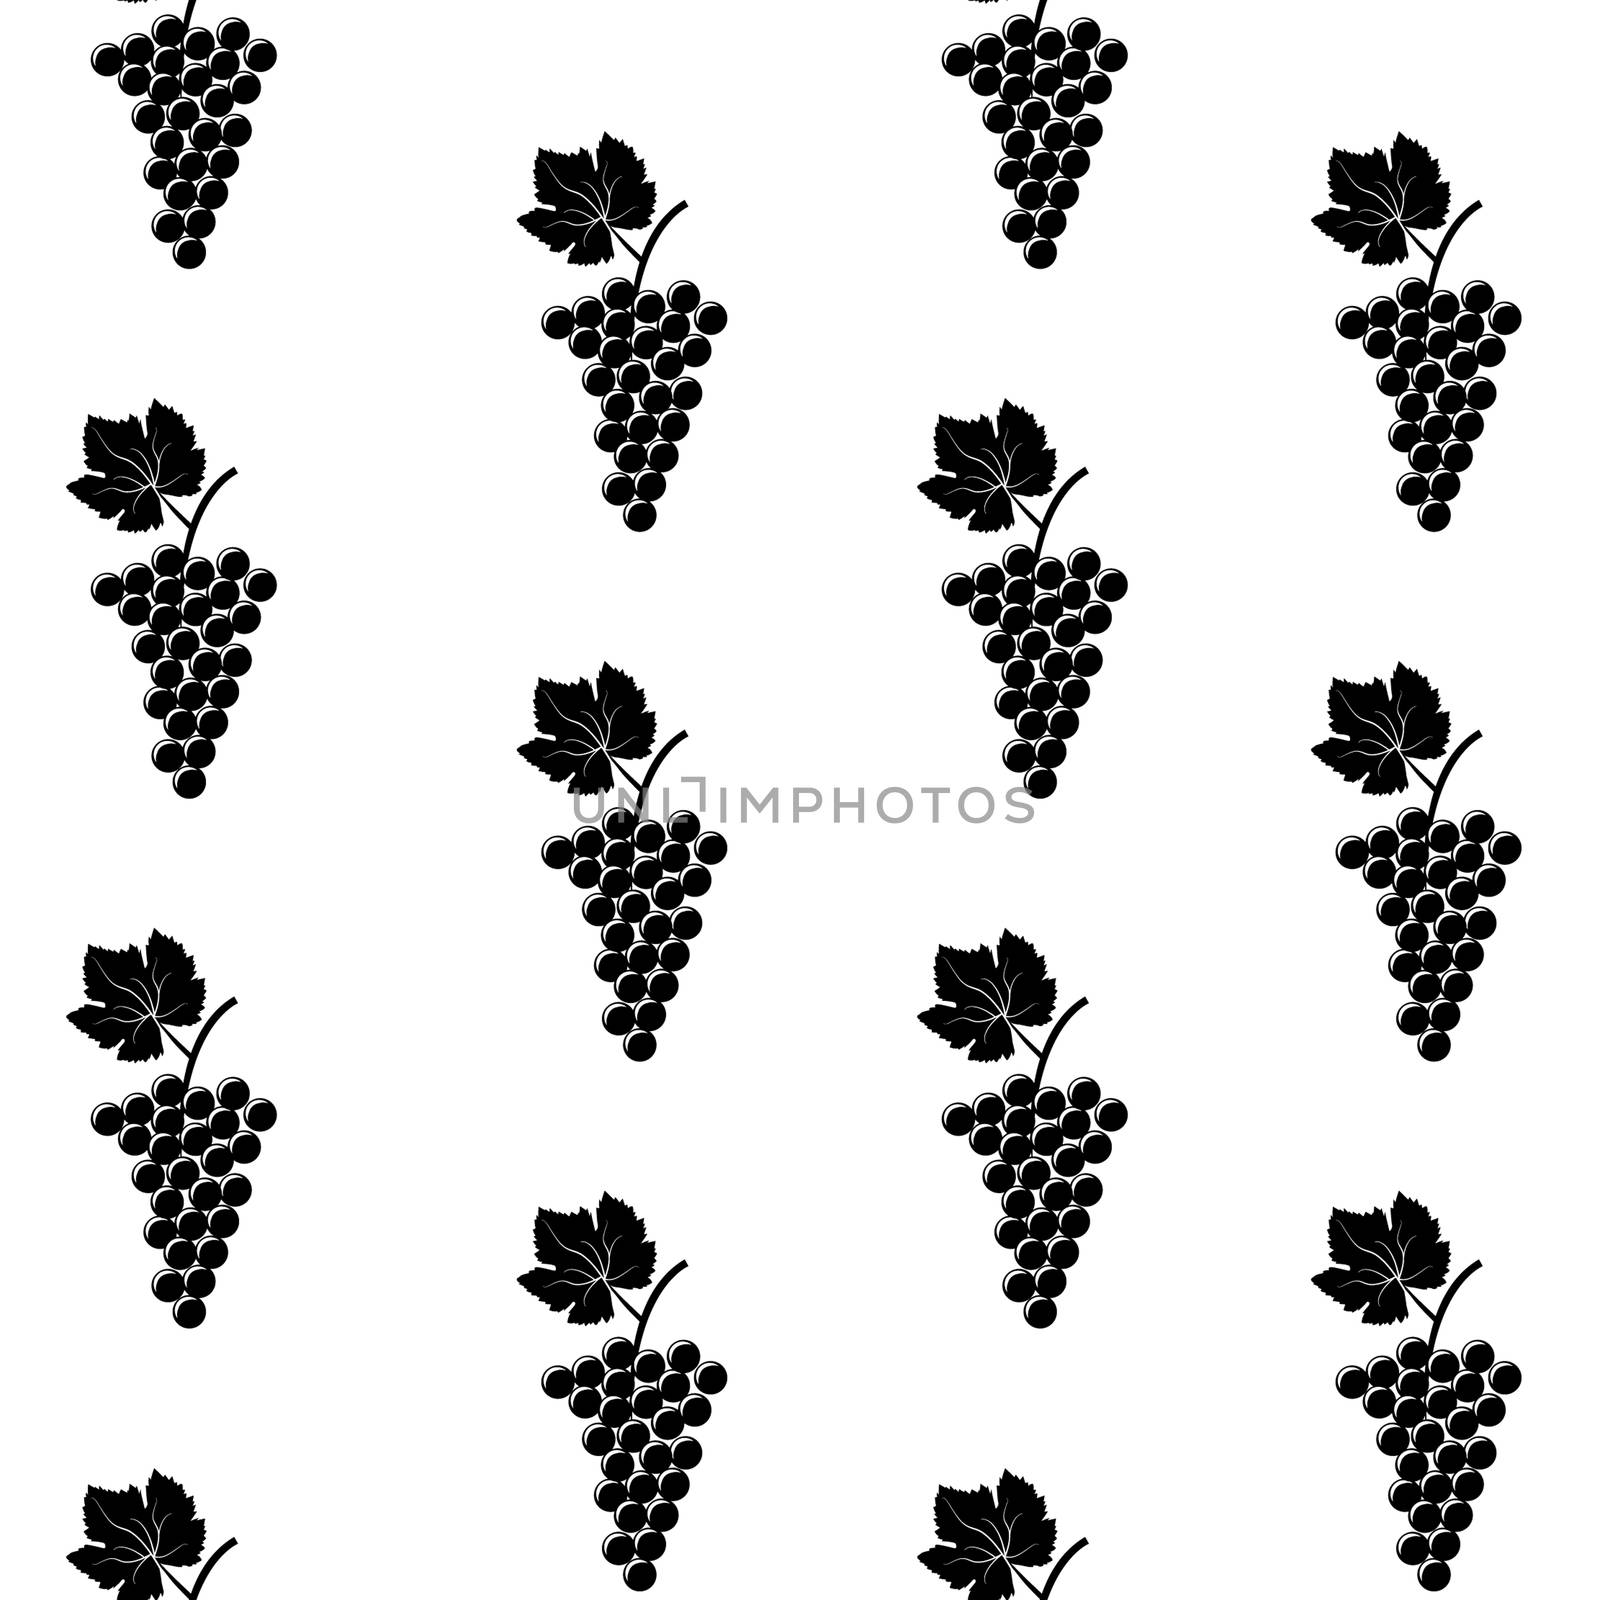 Seamless background of stylized grape bunches by hibrida13